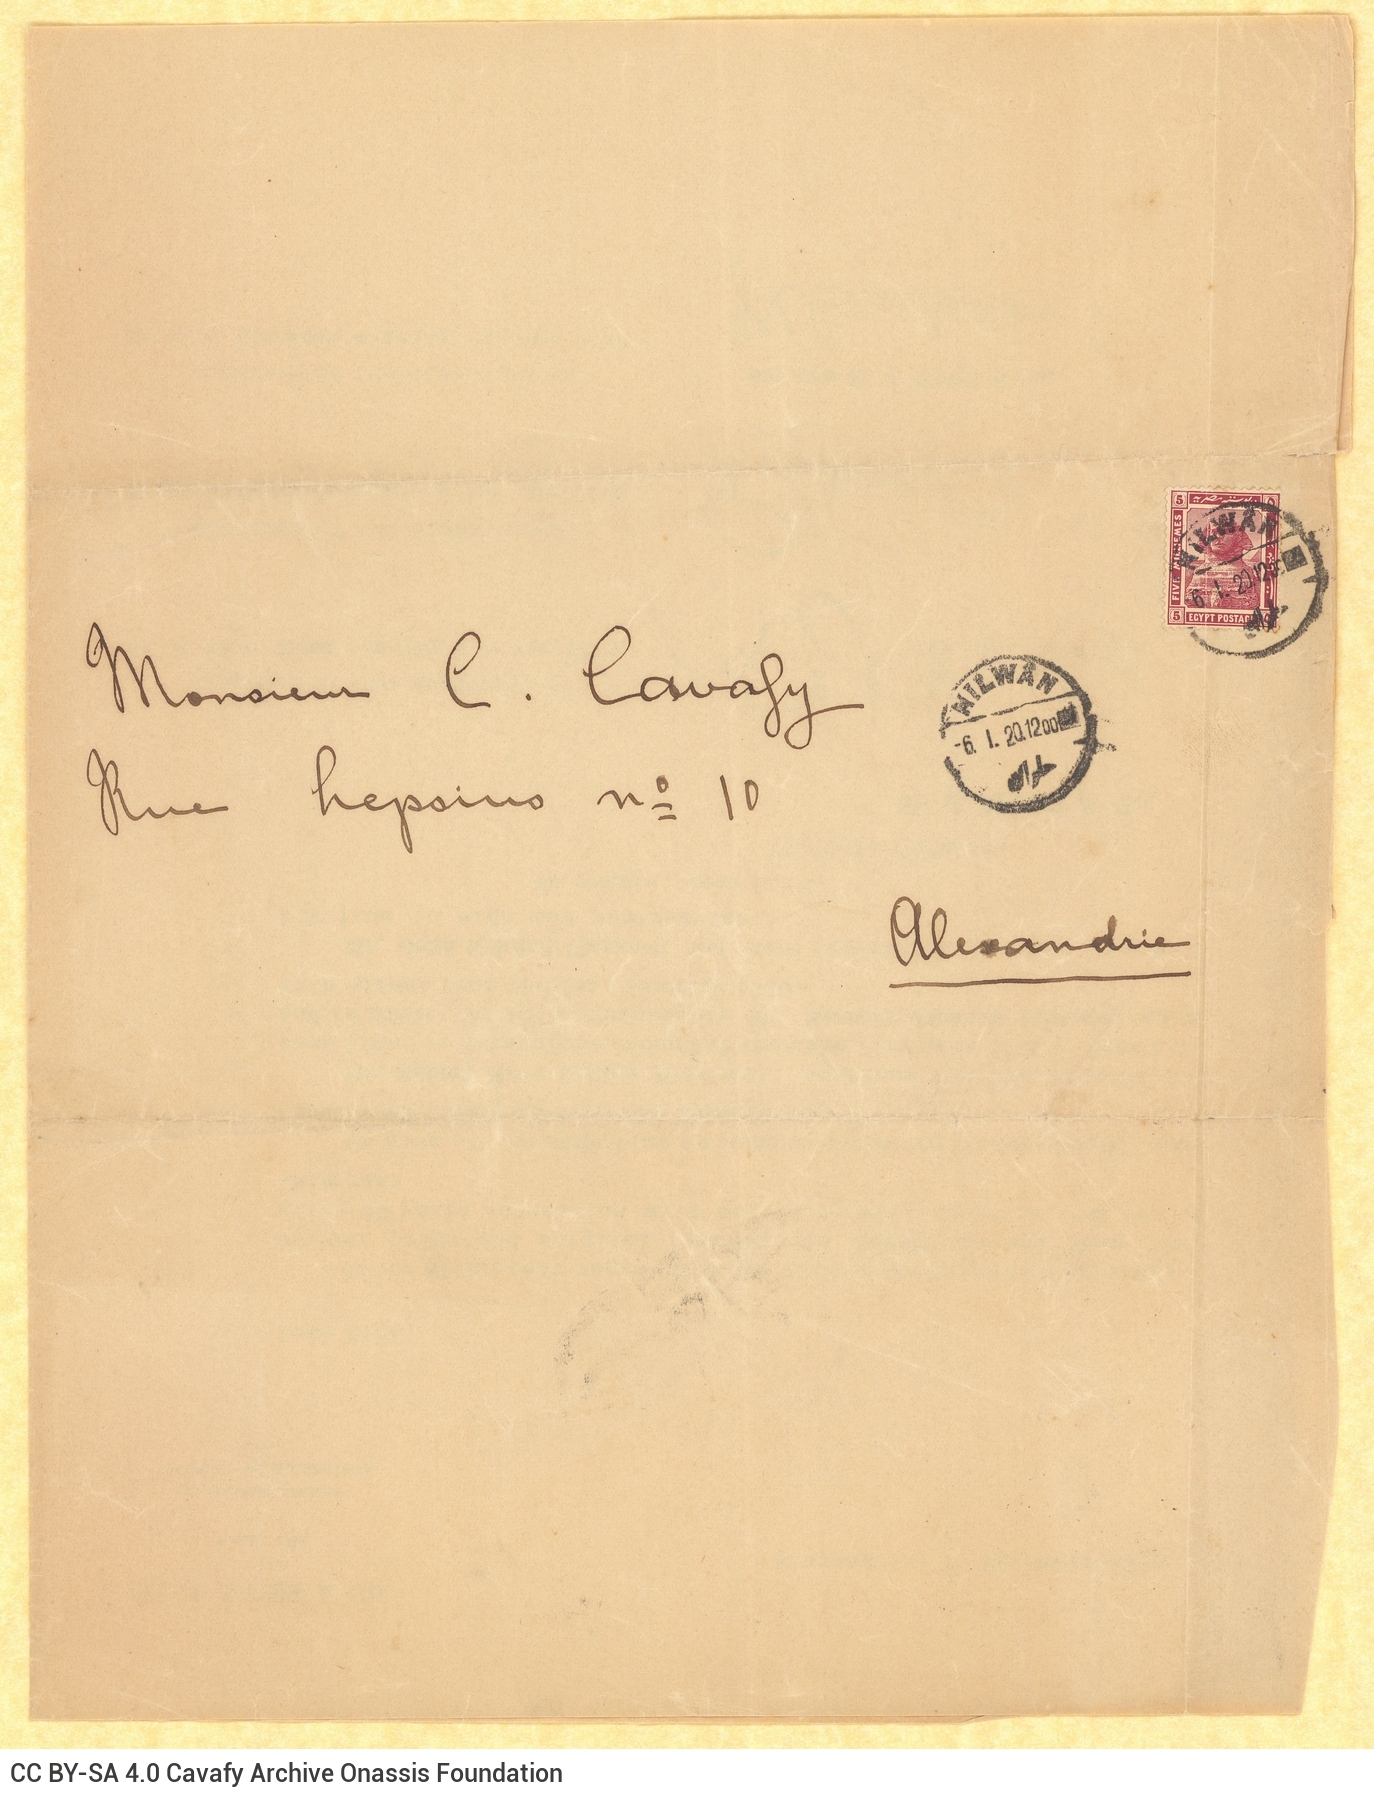 Printed letter by R. J. Moss & Co. ιn the first page of a bifolio. The address of C. P. Cavafy in Alexandria, most probably 